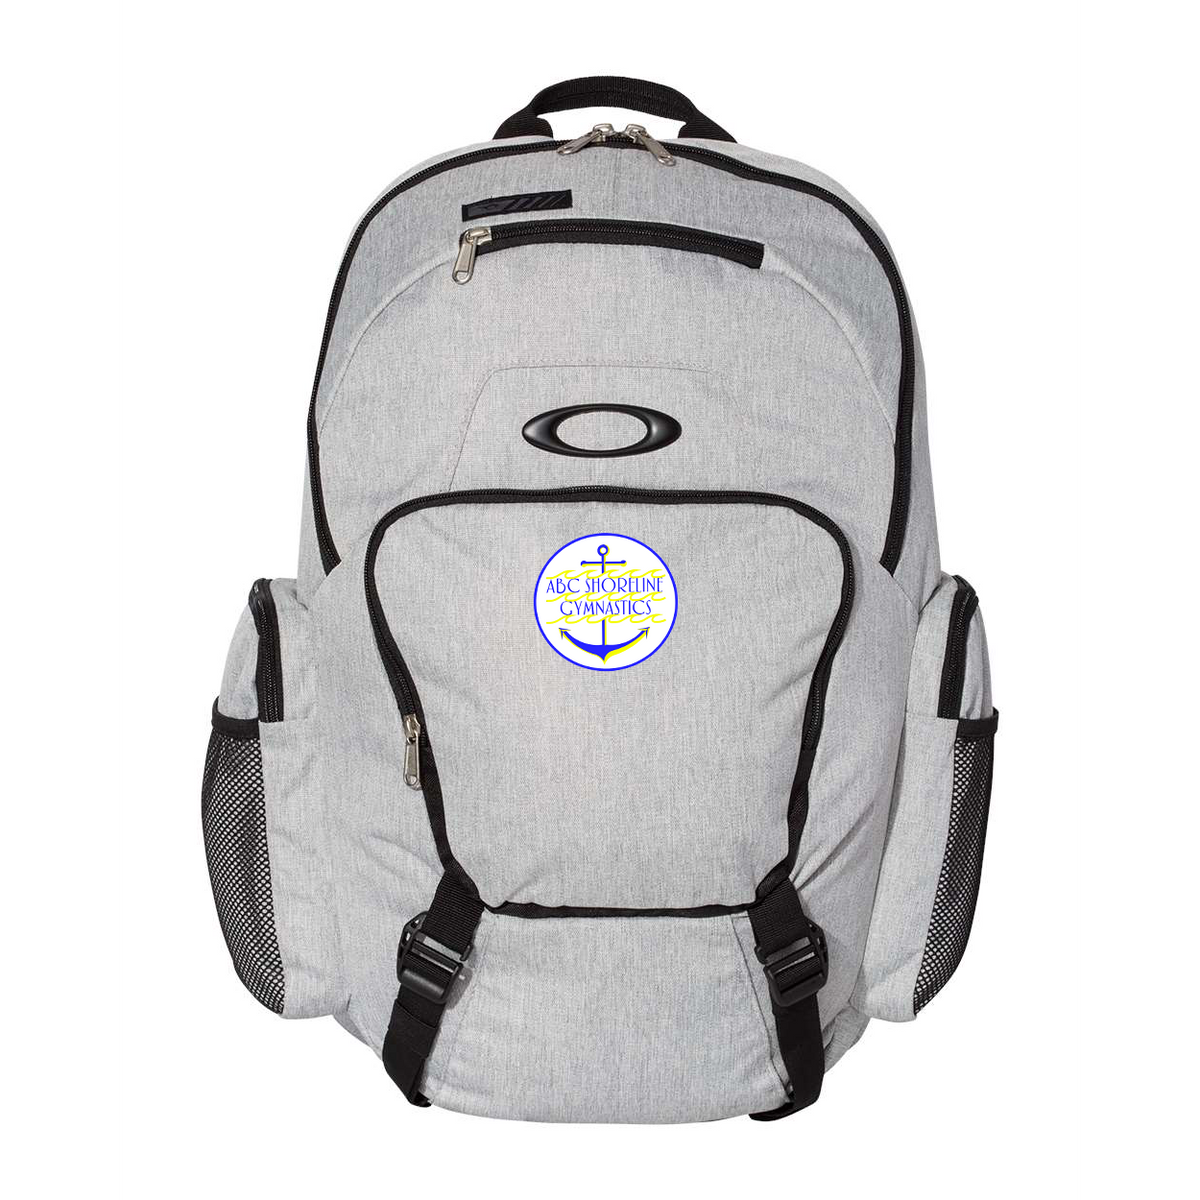 ABC Shoreline Gymnastics - OFFICIAL TEAM BACKPACK FOR COMPETITIONS